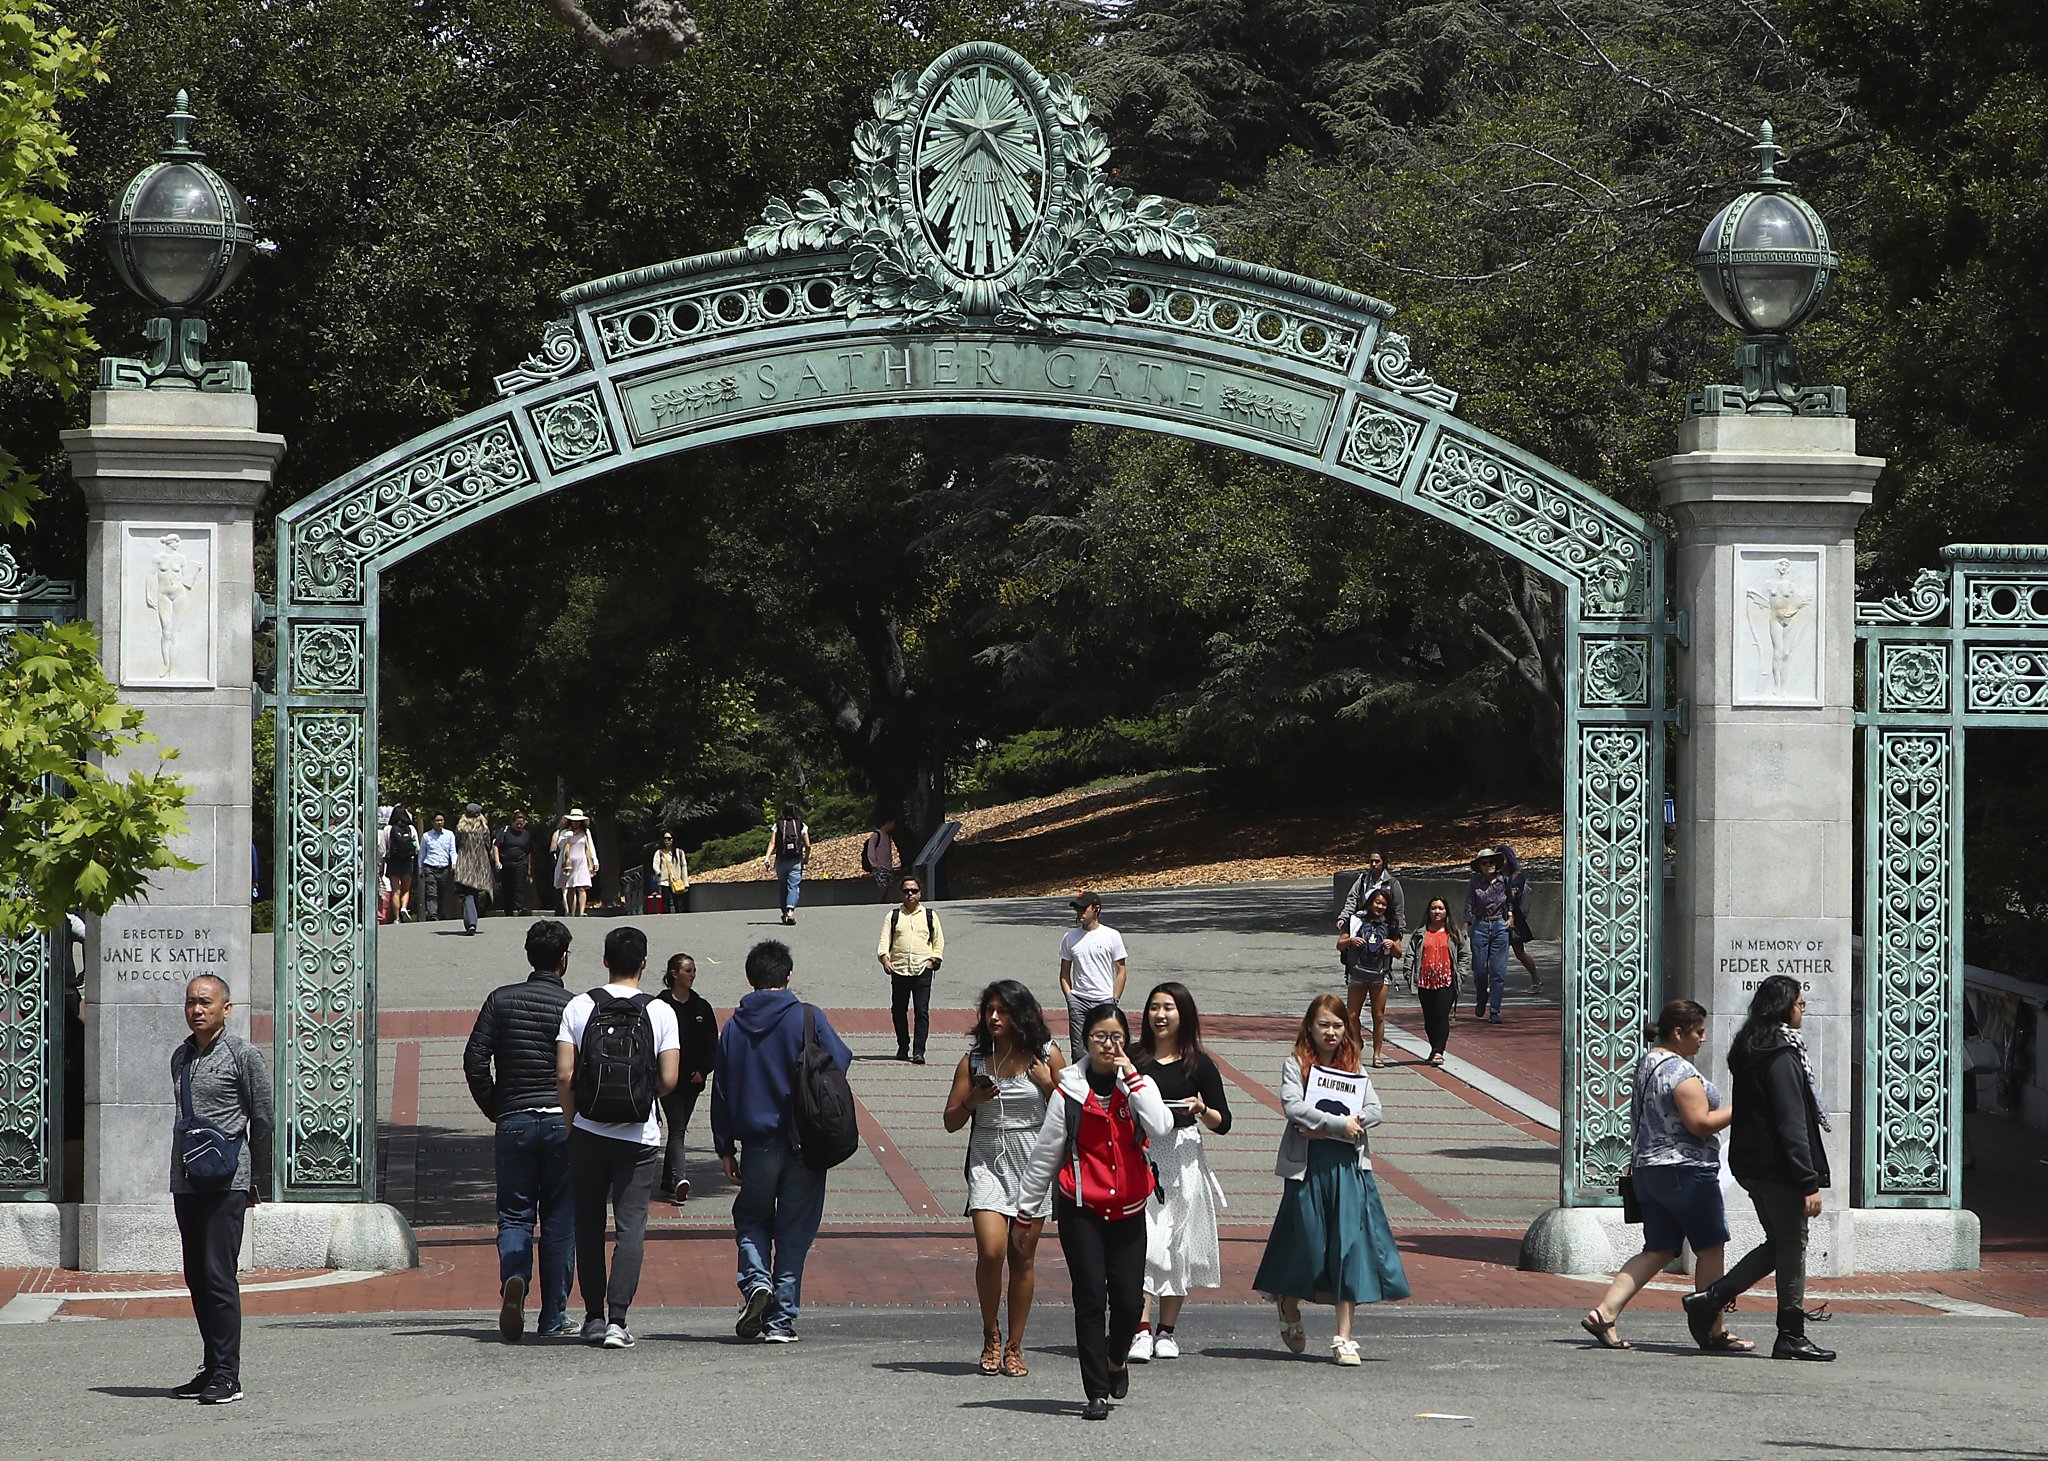 UC Berkeley crowned nation’s top public university in new ranking